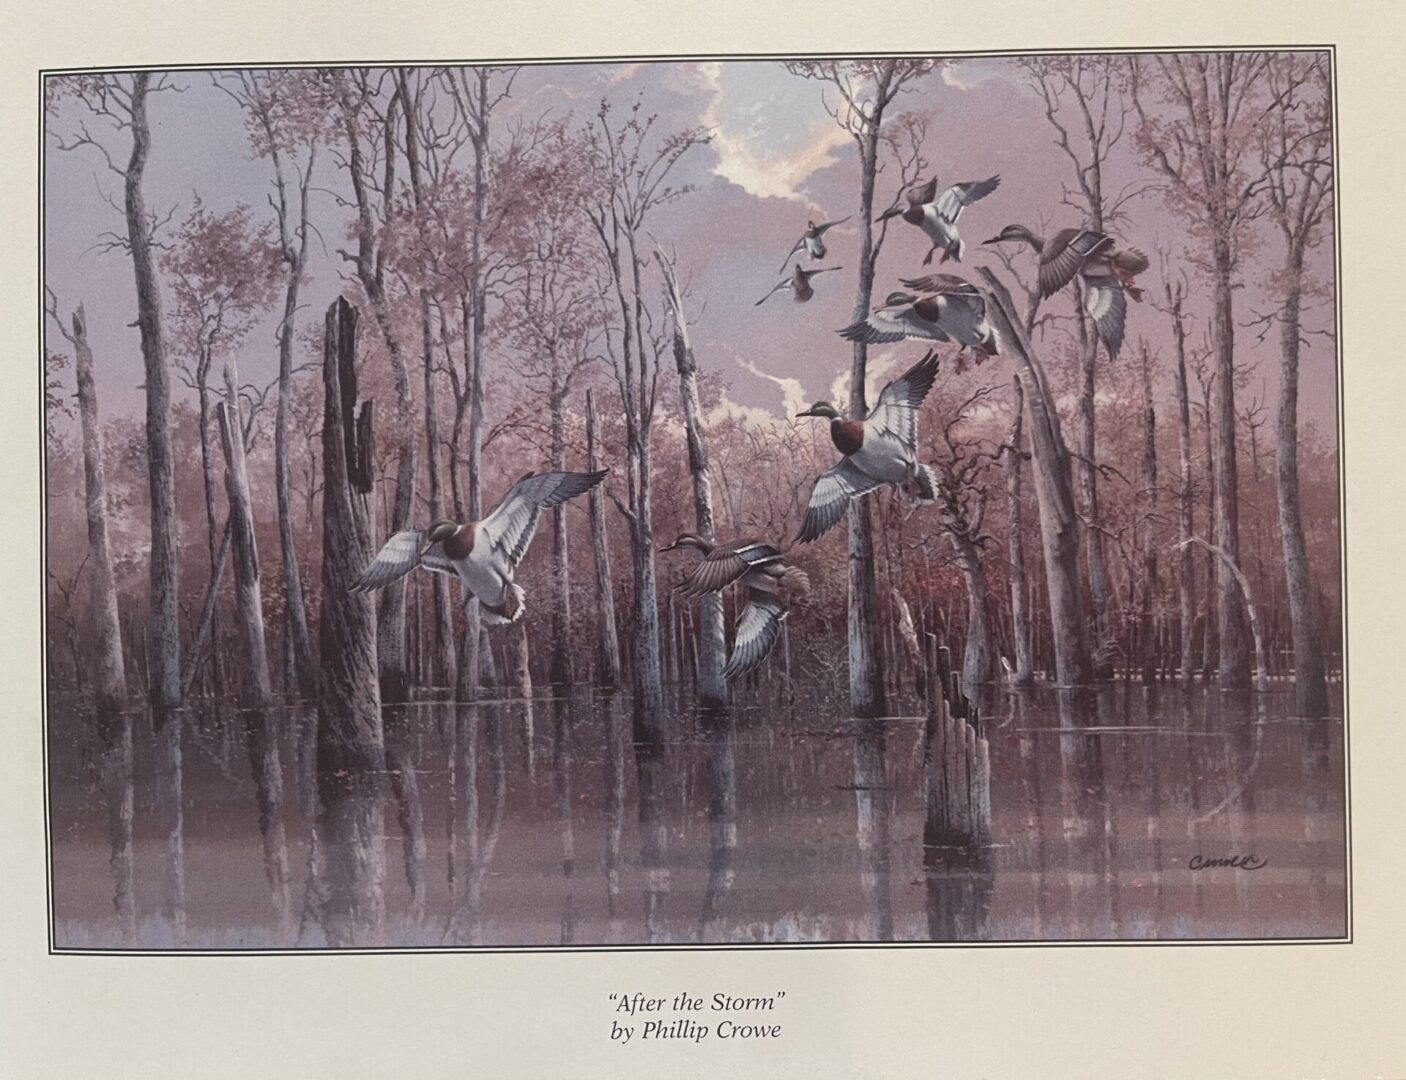 A painting of ducks flying over trees in the water.